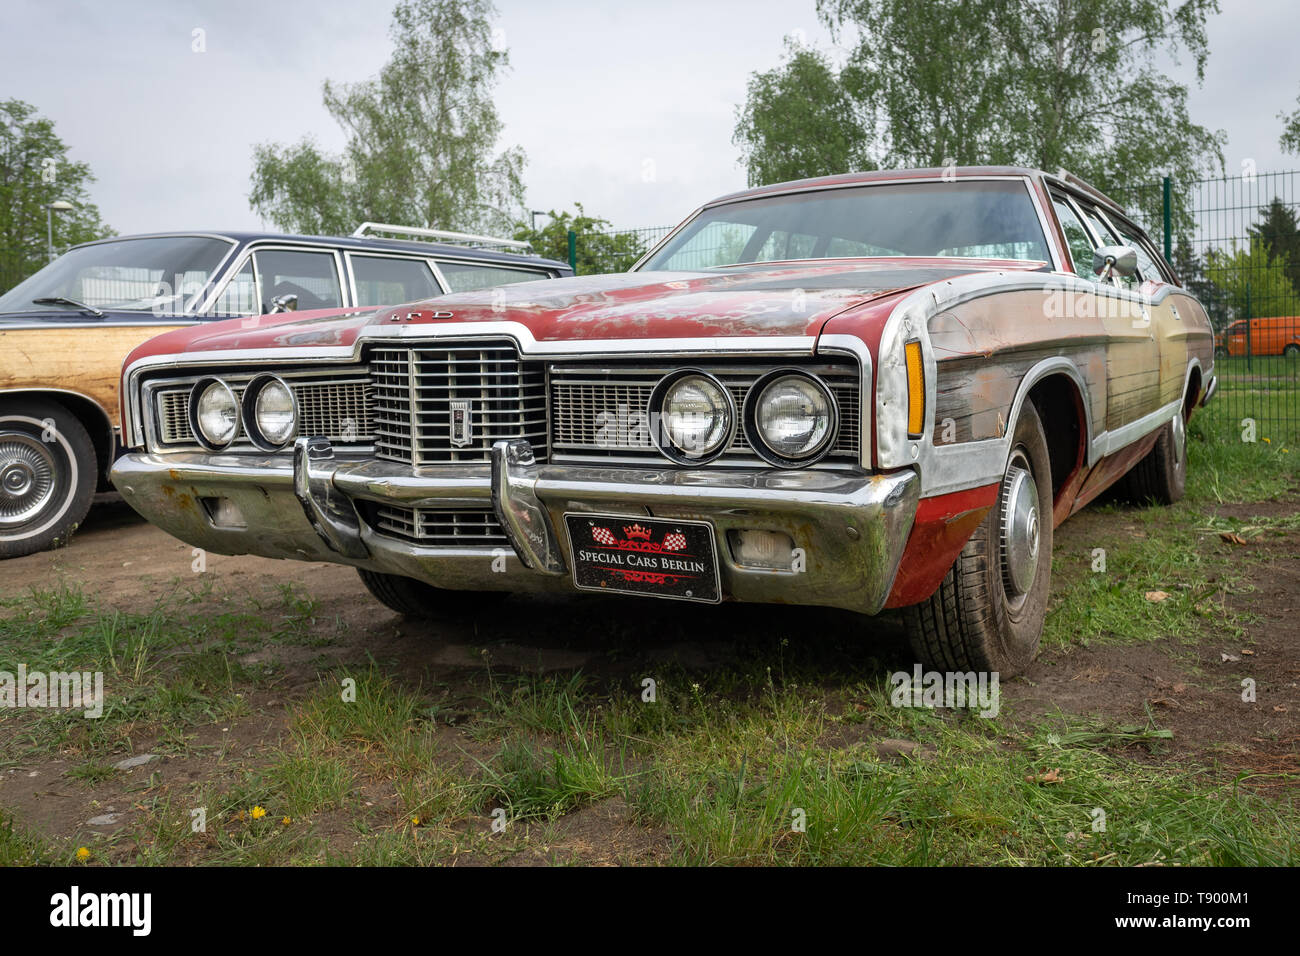 BERLIN - 27 avril 2019 : Full-size station wagon Ford LTD Country Squire, 1972 Banque D'Images